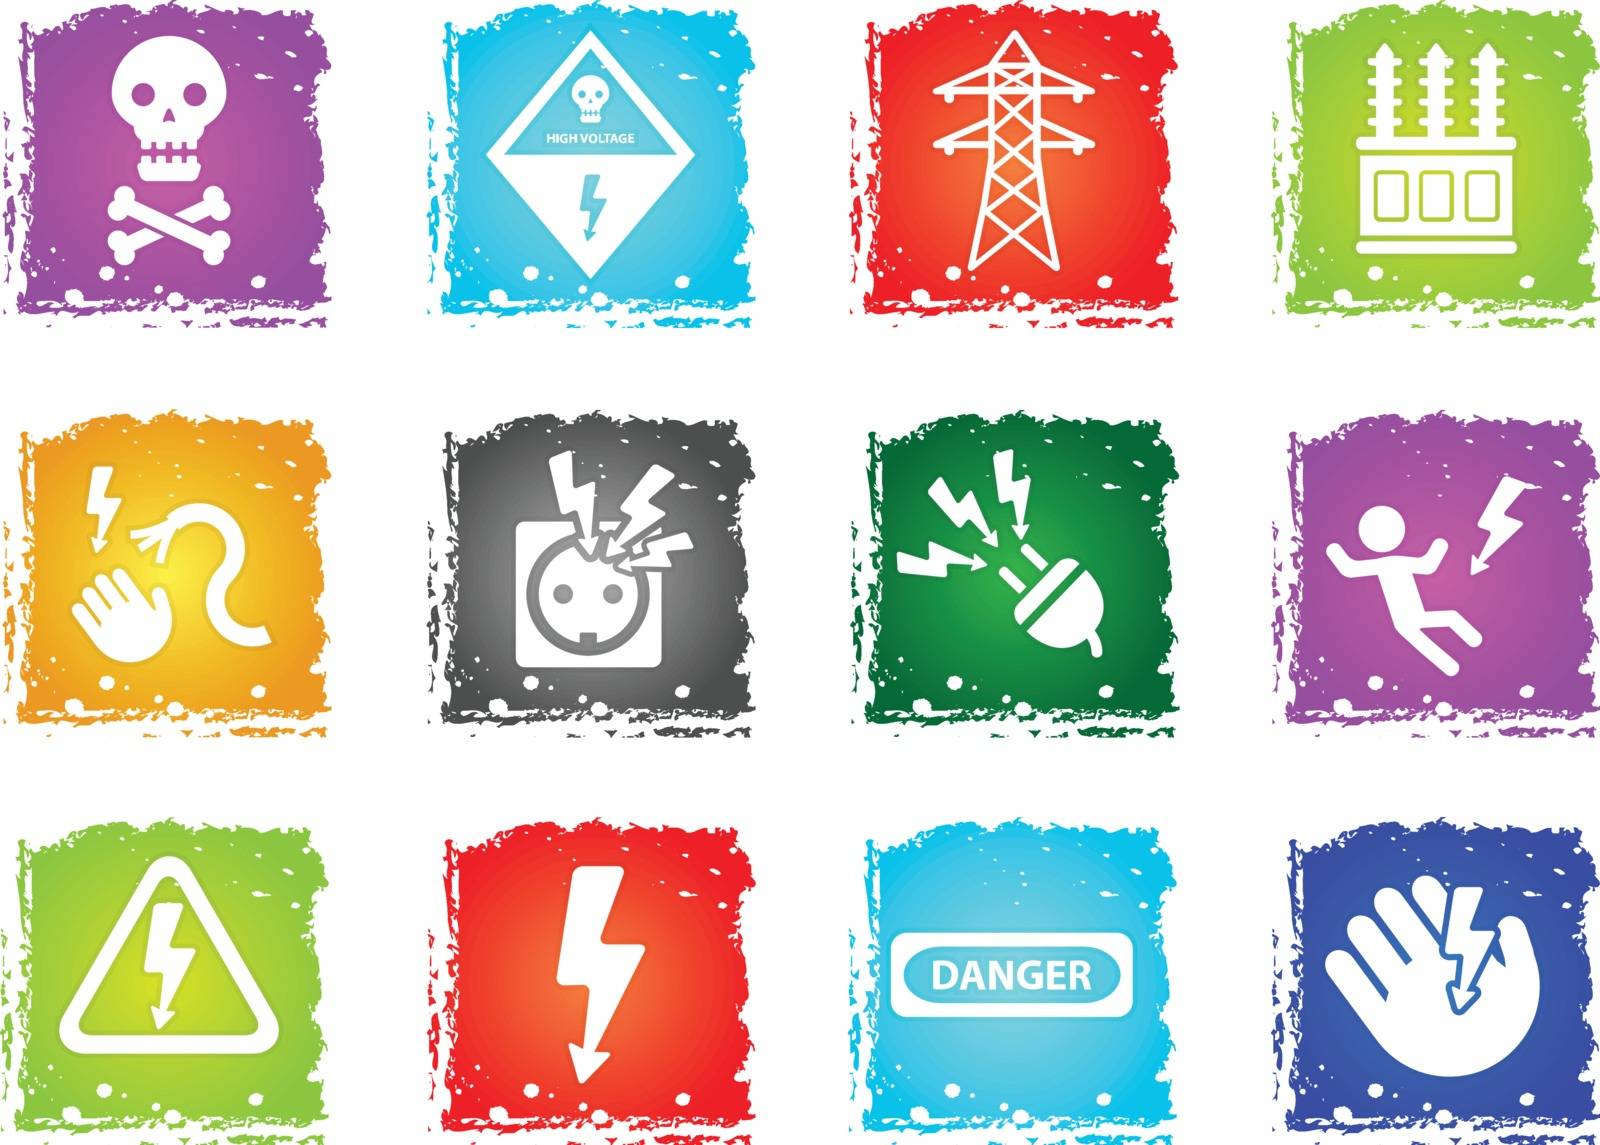 high voltage web icons in grunge style for user interface design